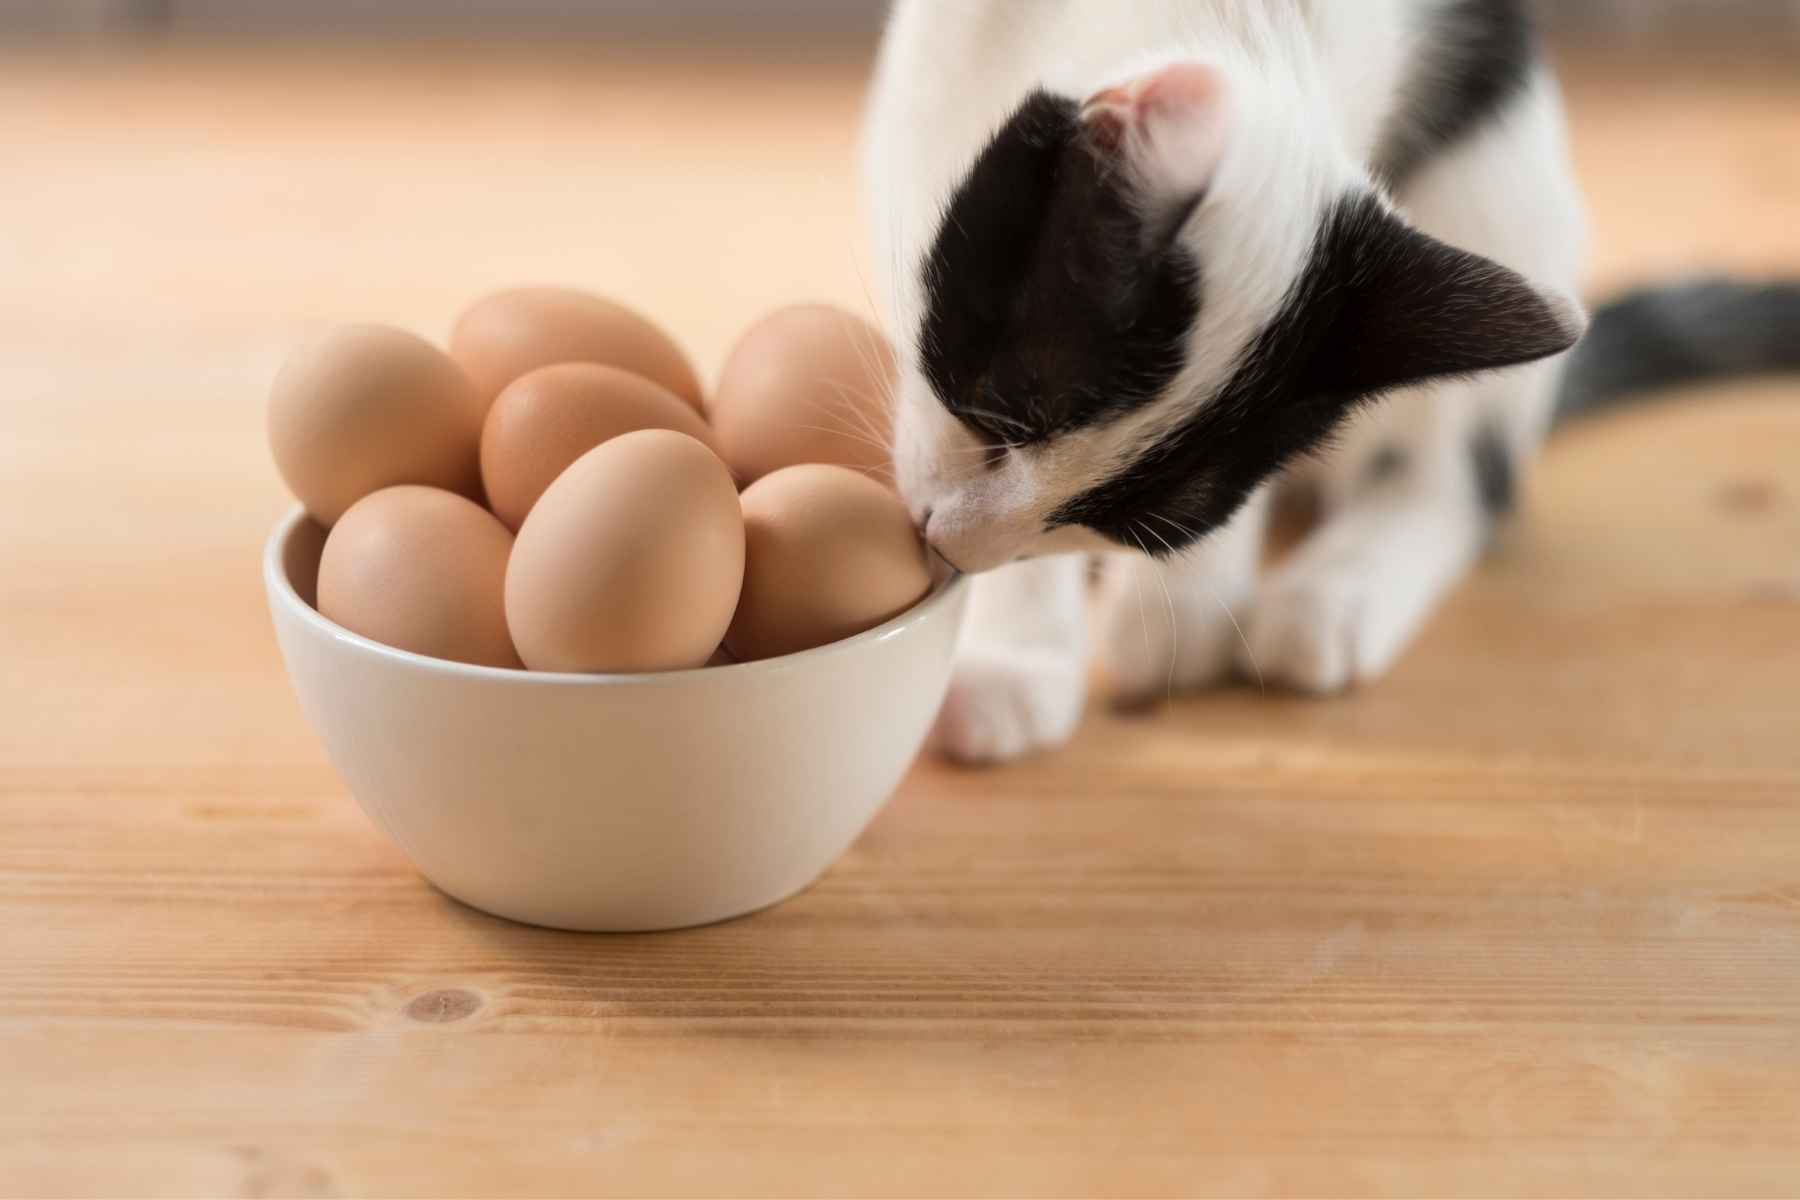 Black and white cat sniffing on a bowl of eggs